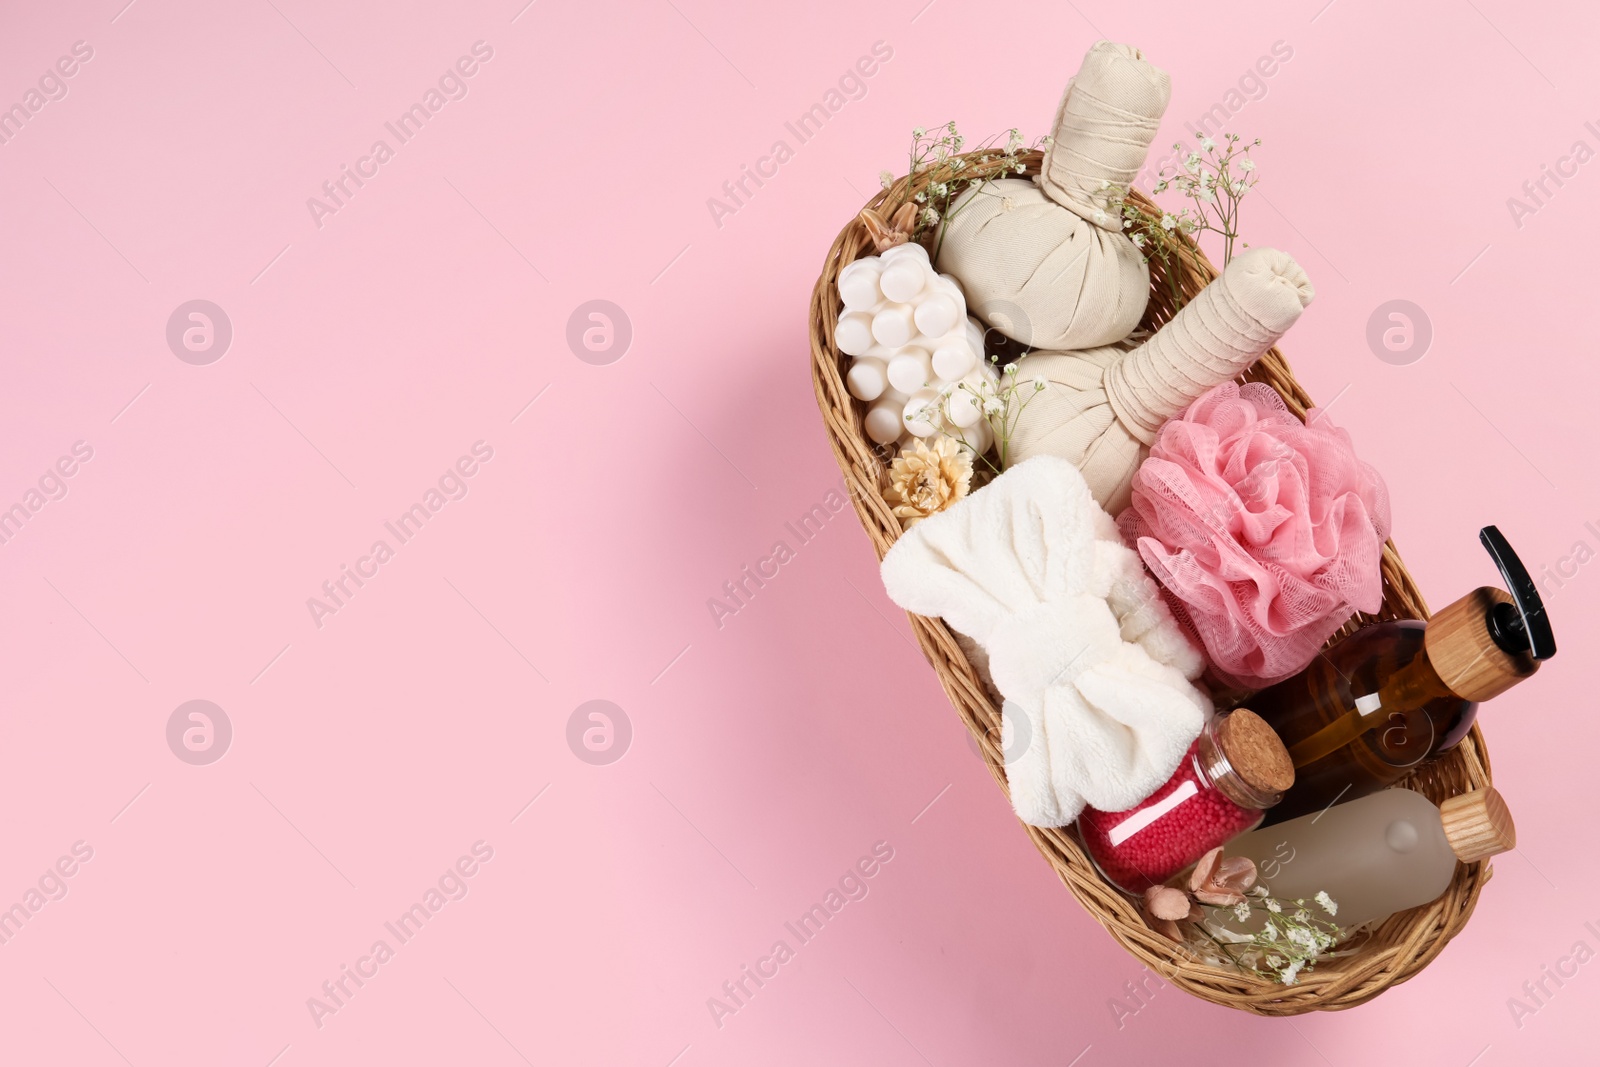 Photo of Spa gift set with different products in wicker basket on pink background, top view. Space for text